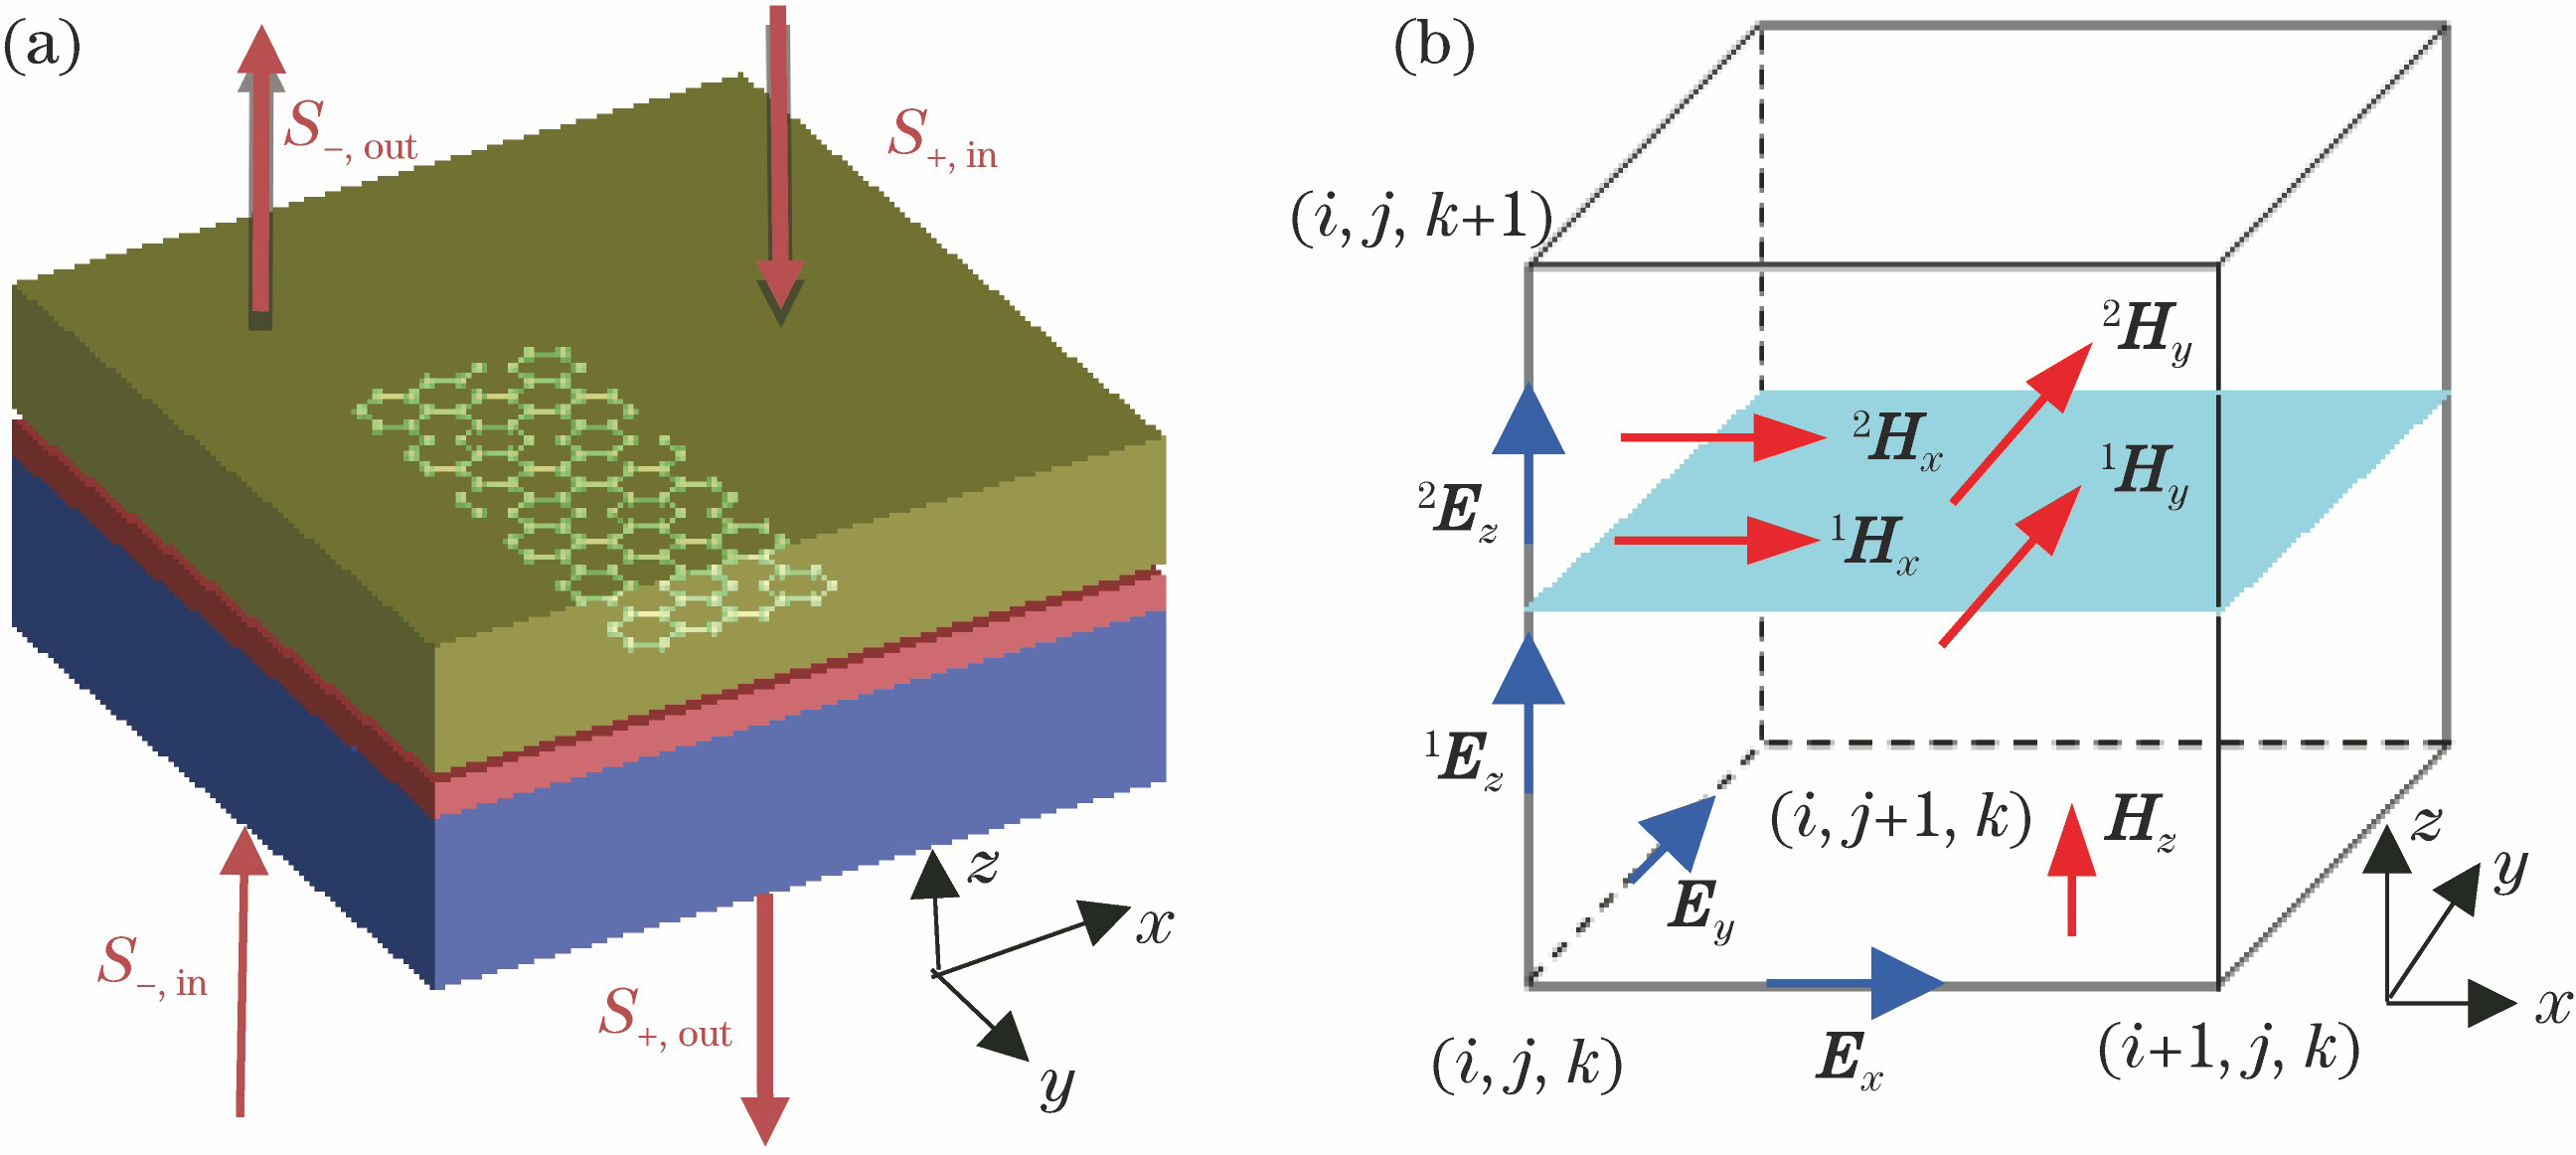 Model structure and FDTD discrete Yee cell. (a) Lattice structure of graphene ribbon; (b) 3D FDTD discrete Yee cell with graphene ribbon at z=k+1/2 where a zero-thickness graphene ribbon is placed